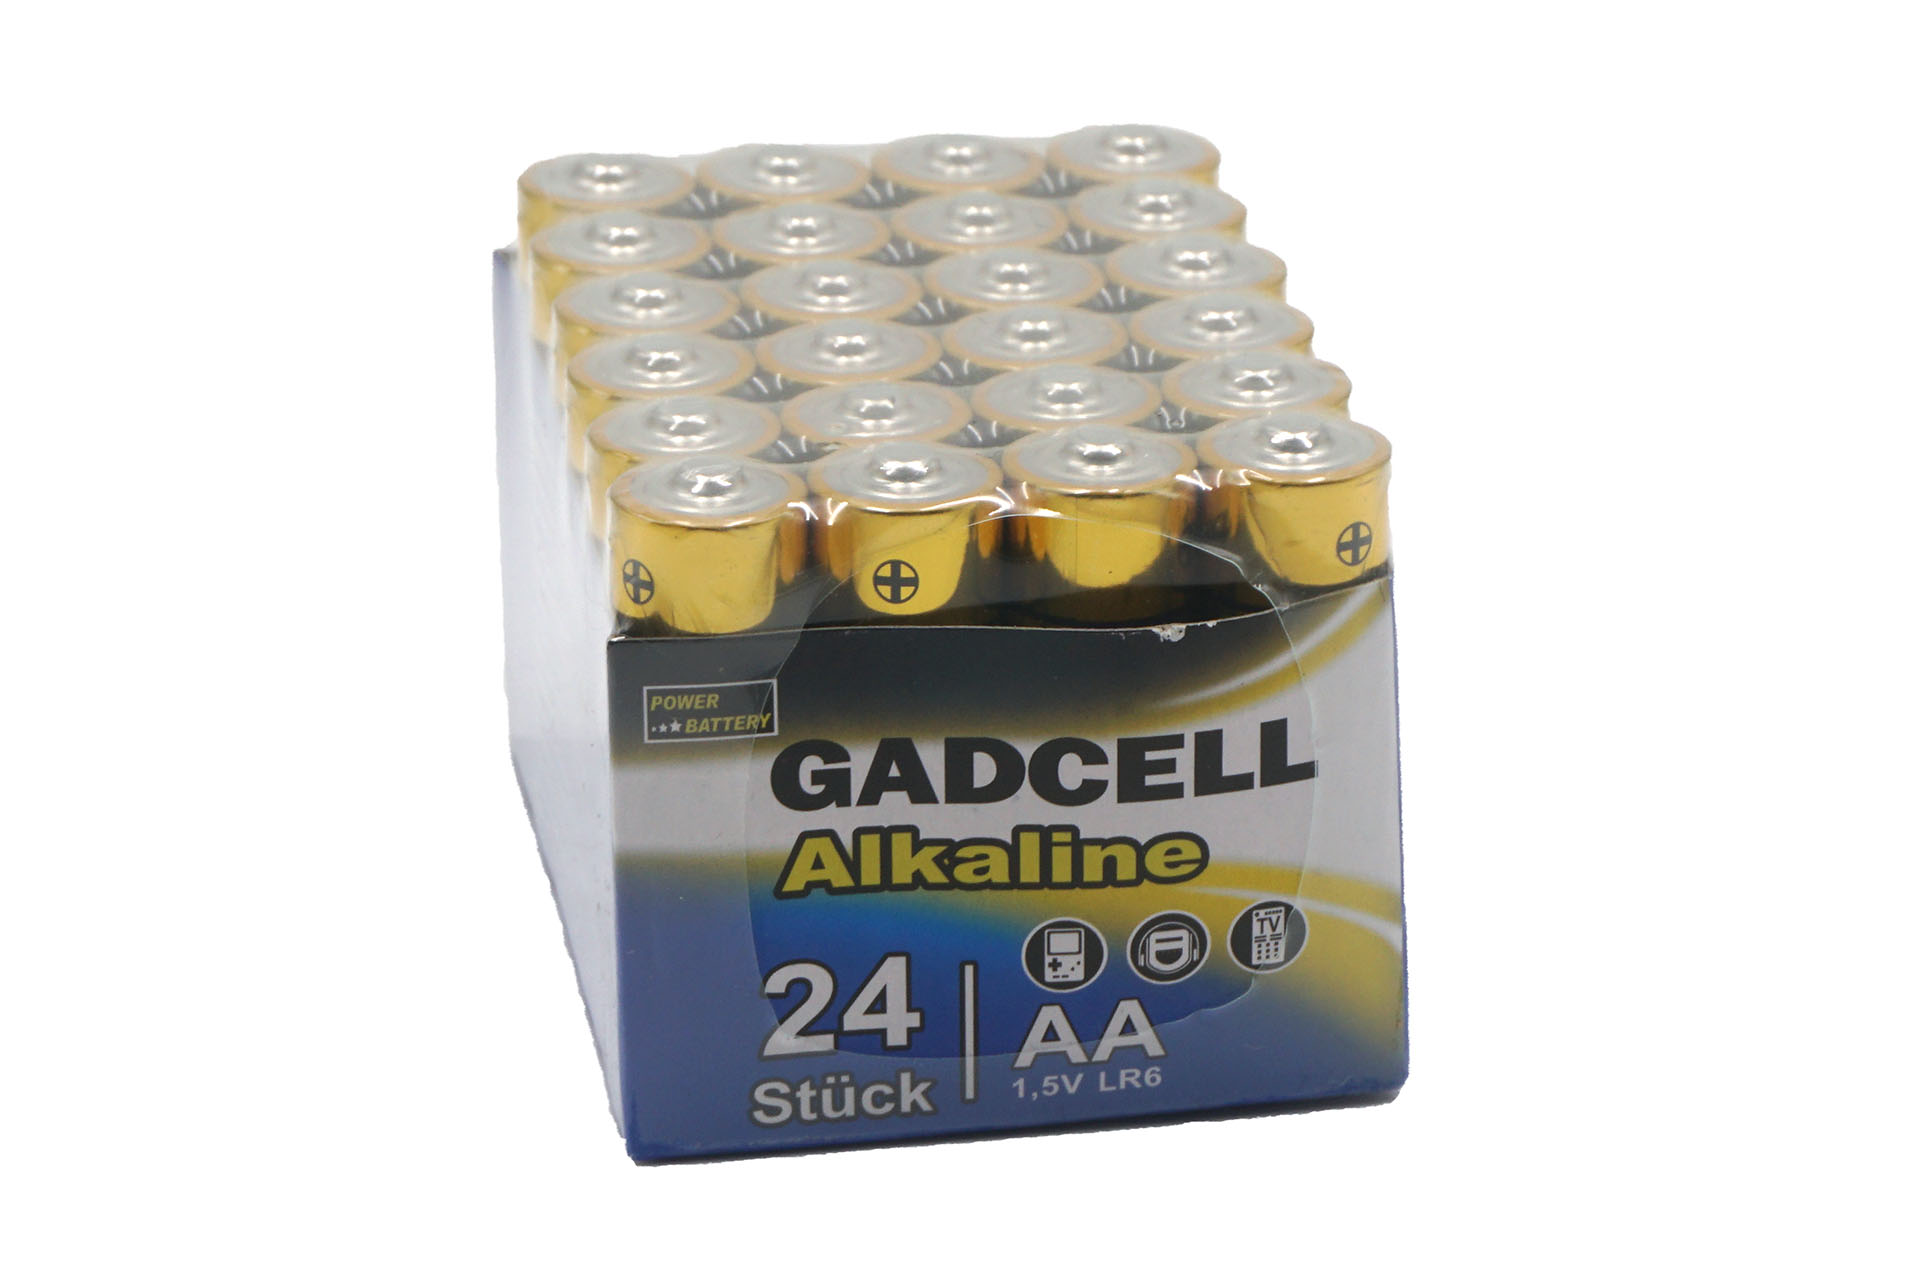 Cadcell Alkaline POWER AA/LR6 24iger